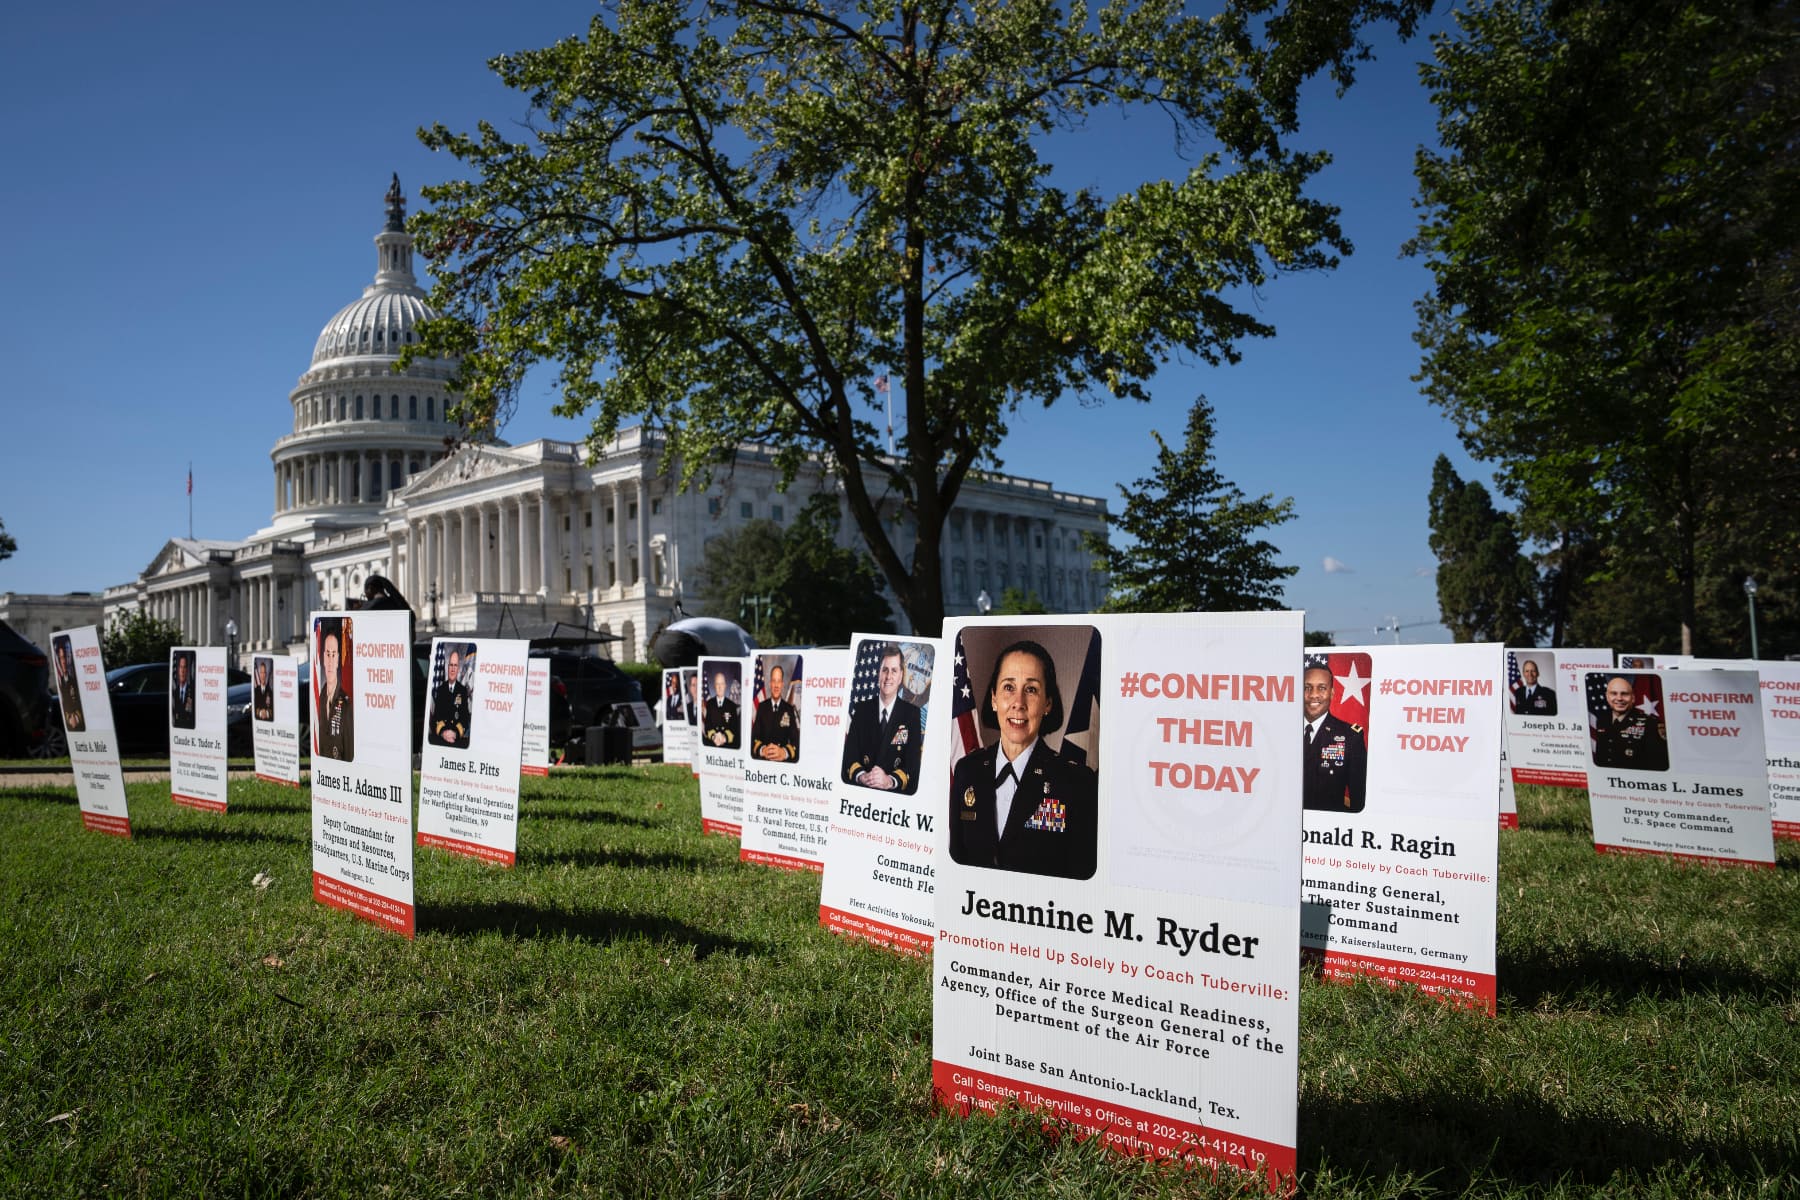 Signs saying "#Confirm them today" with photos and information about service members sit on the lawn at the U.S. Capitol